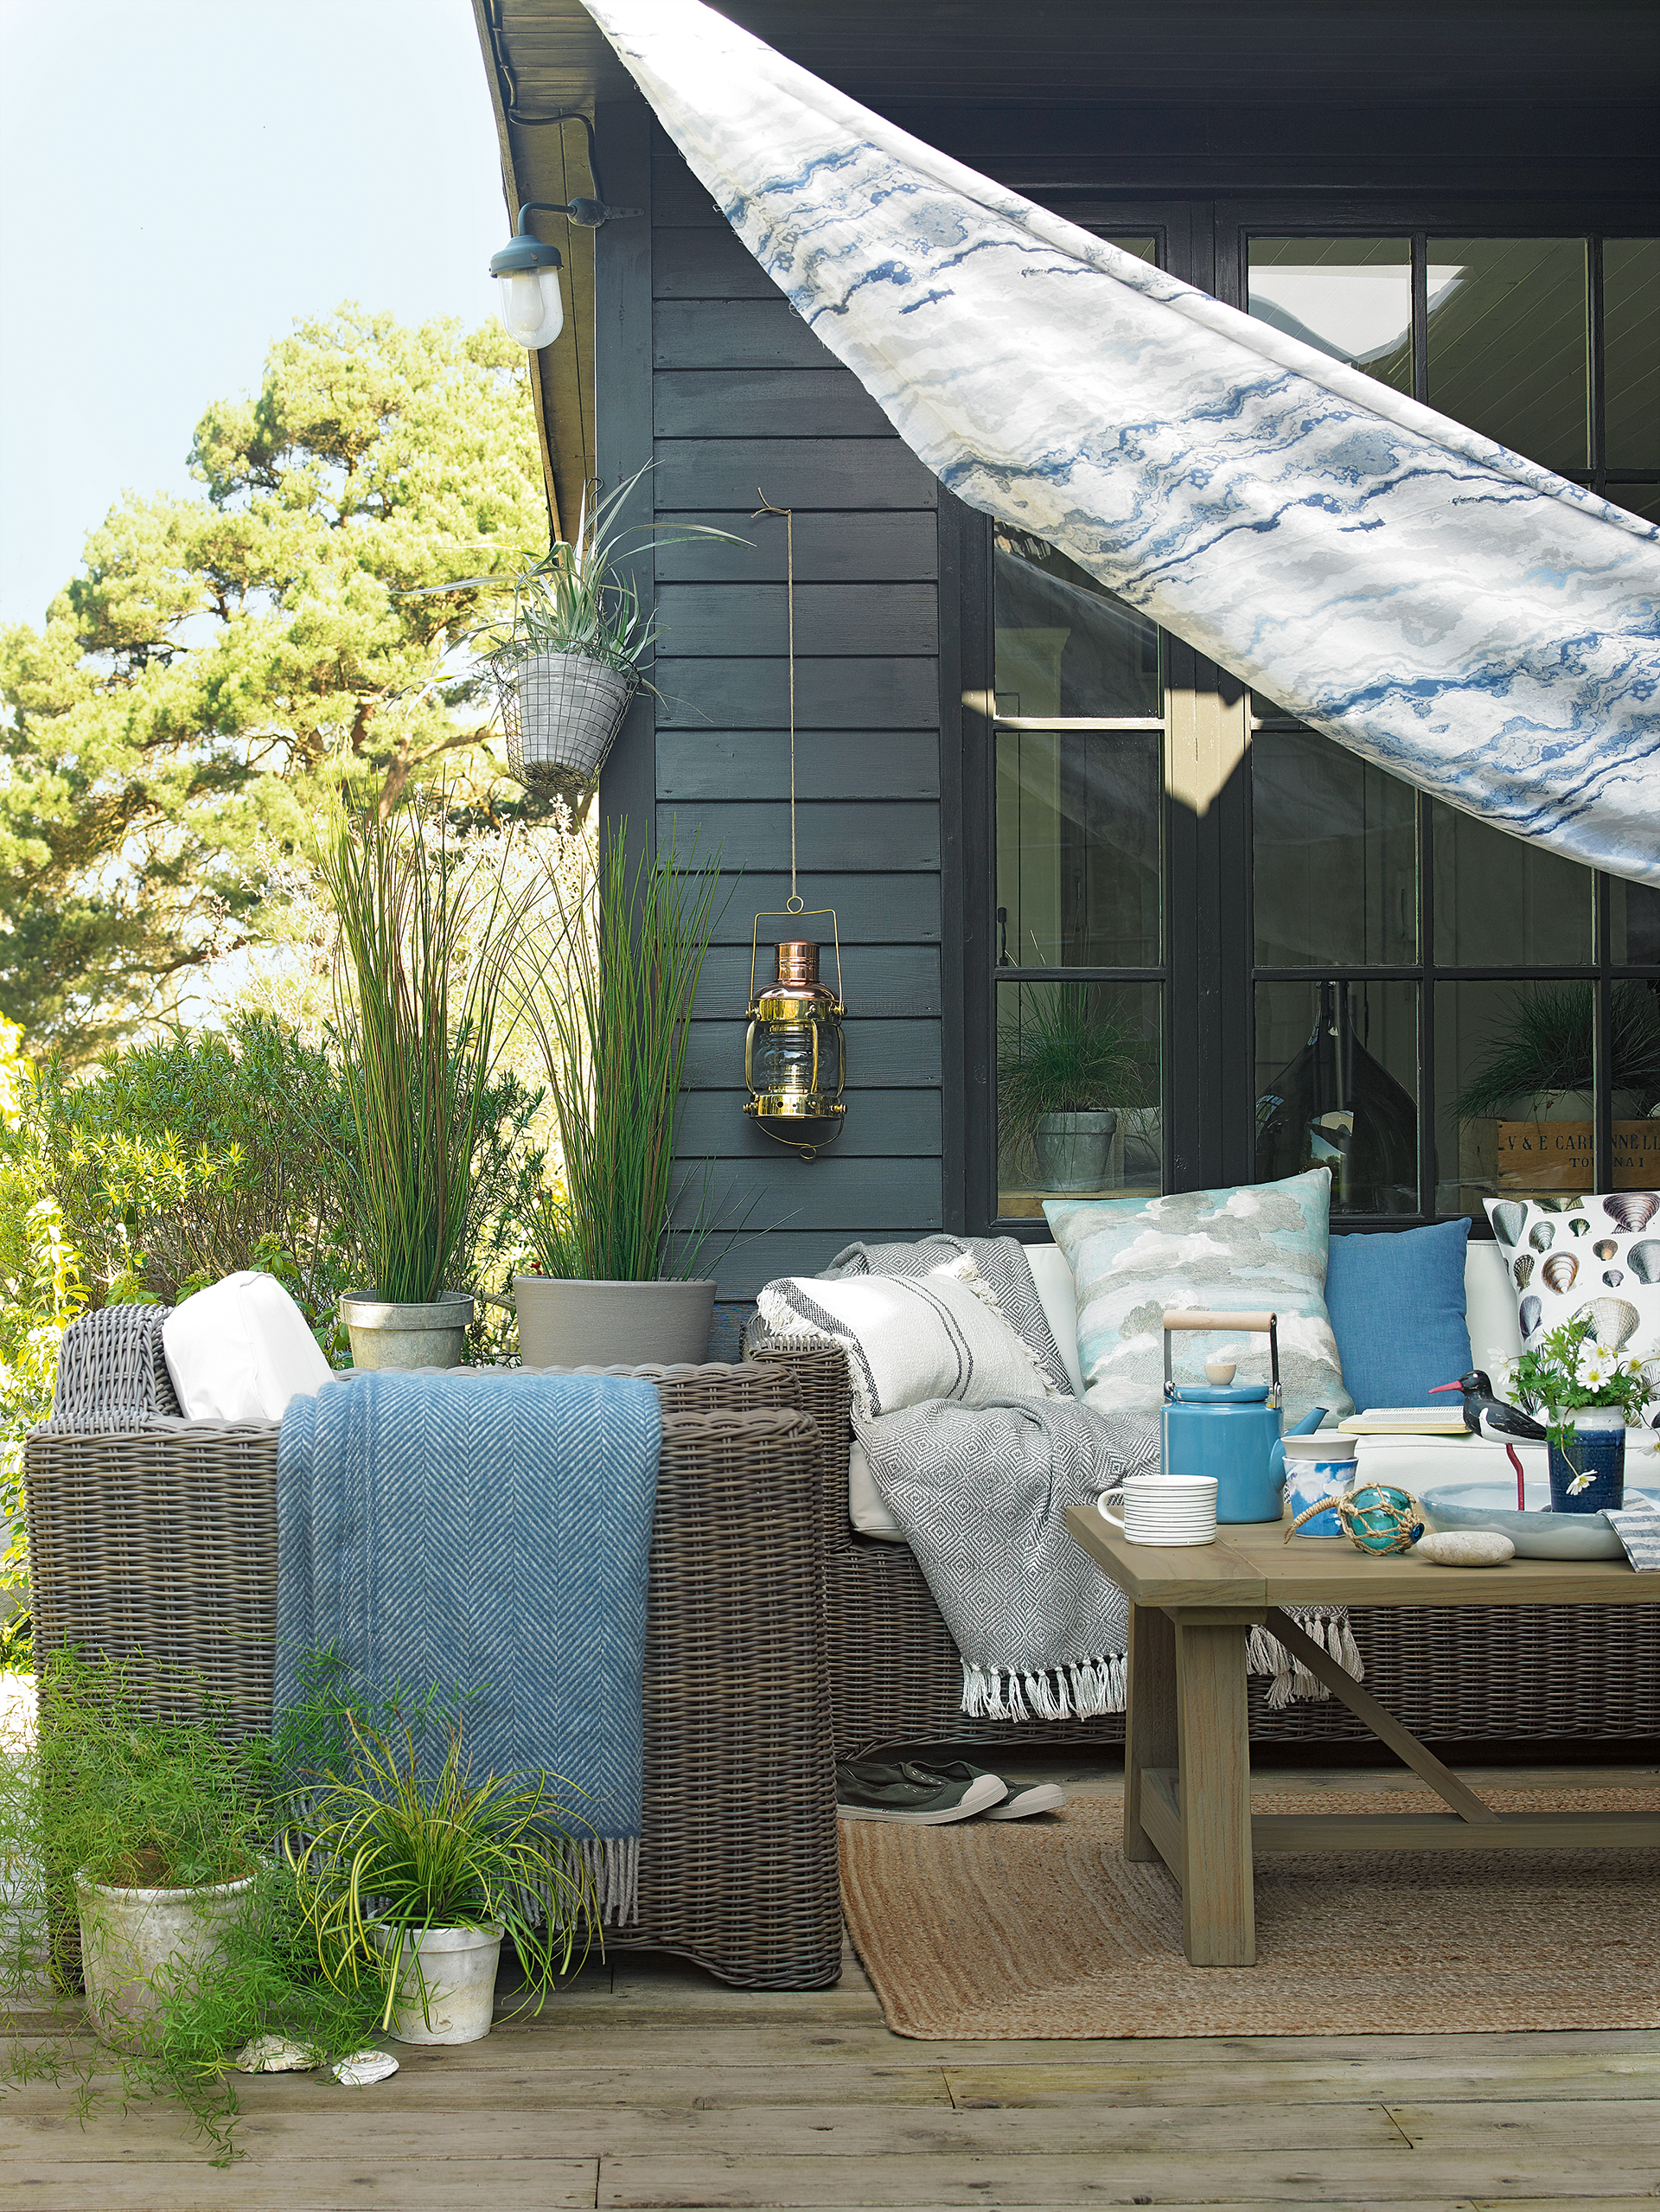 decking with colorful blue sail and garden furniture